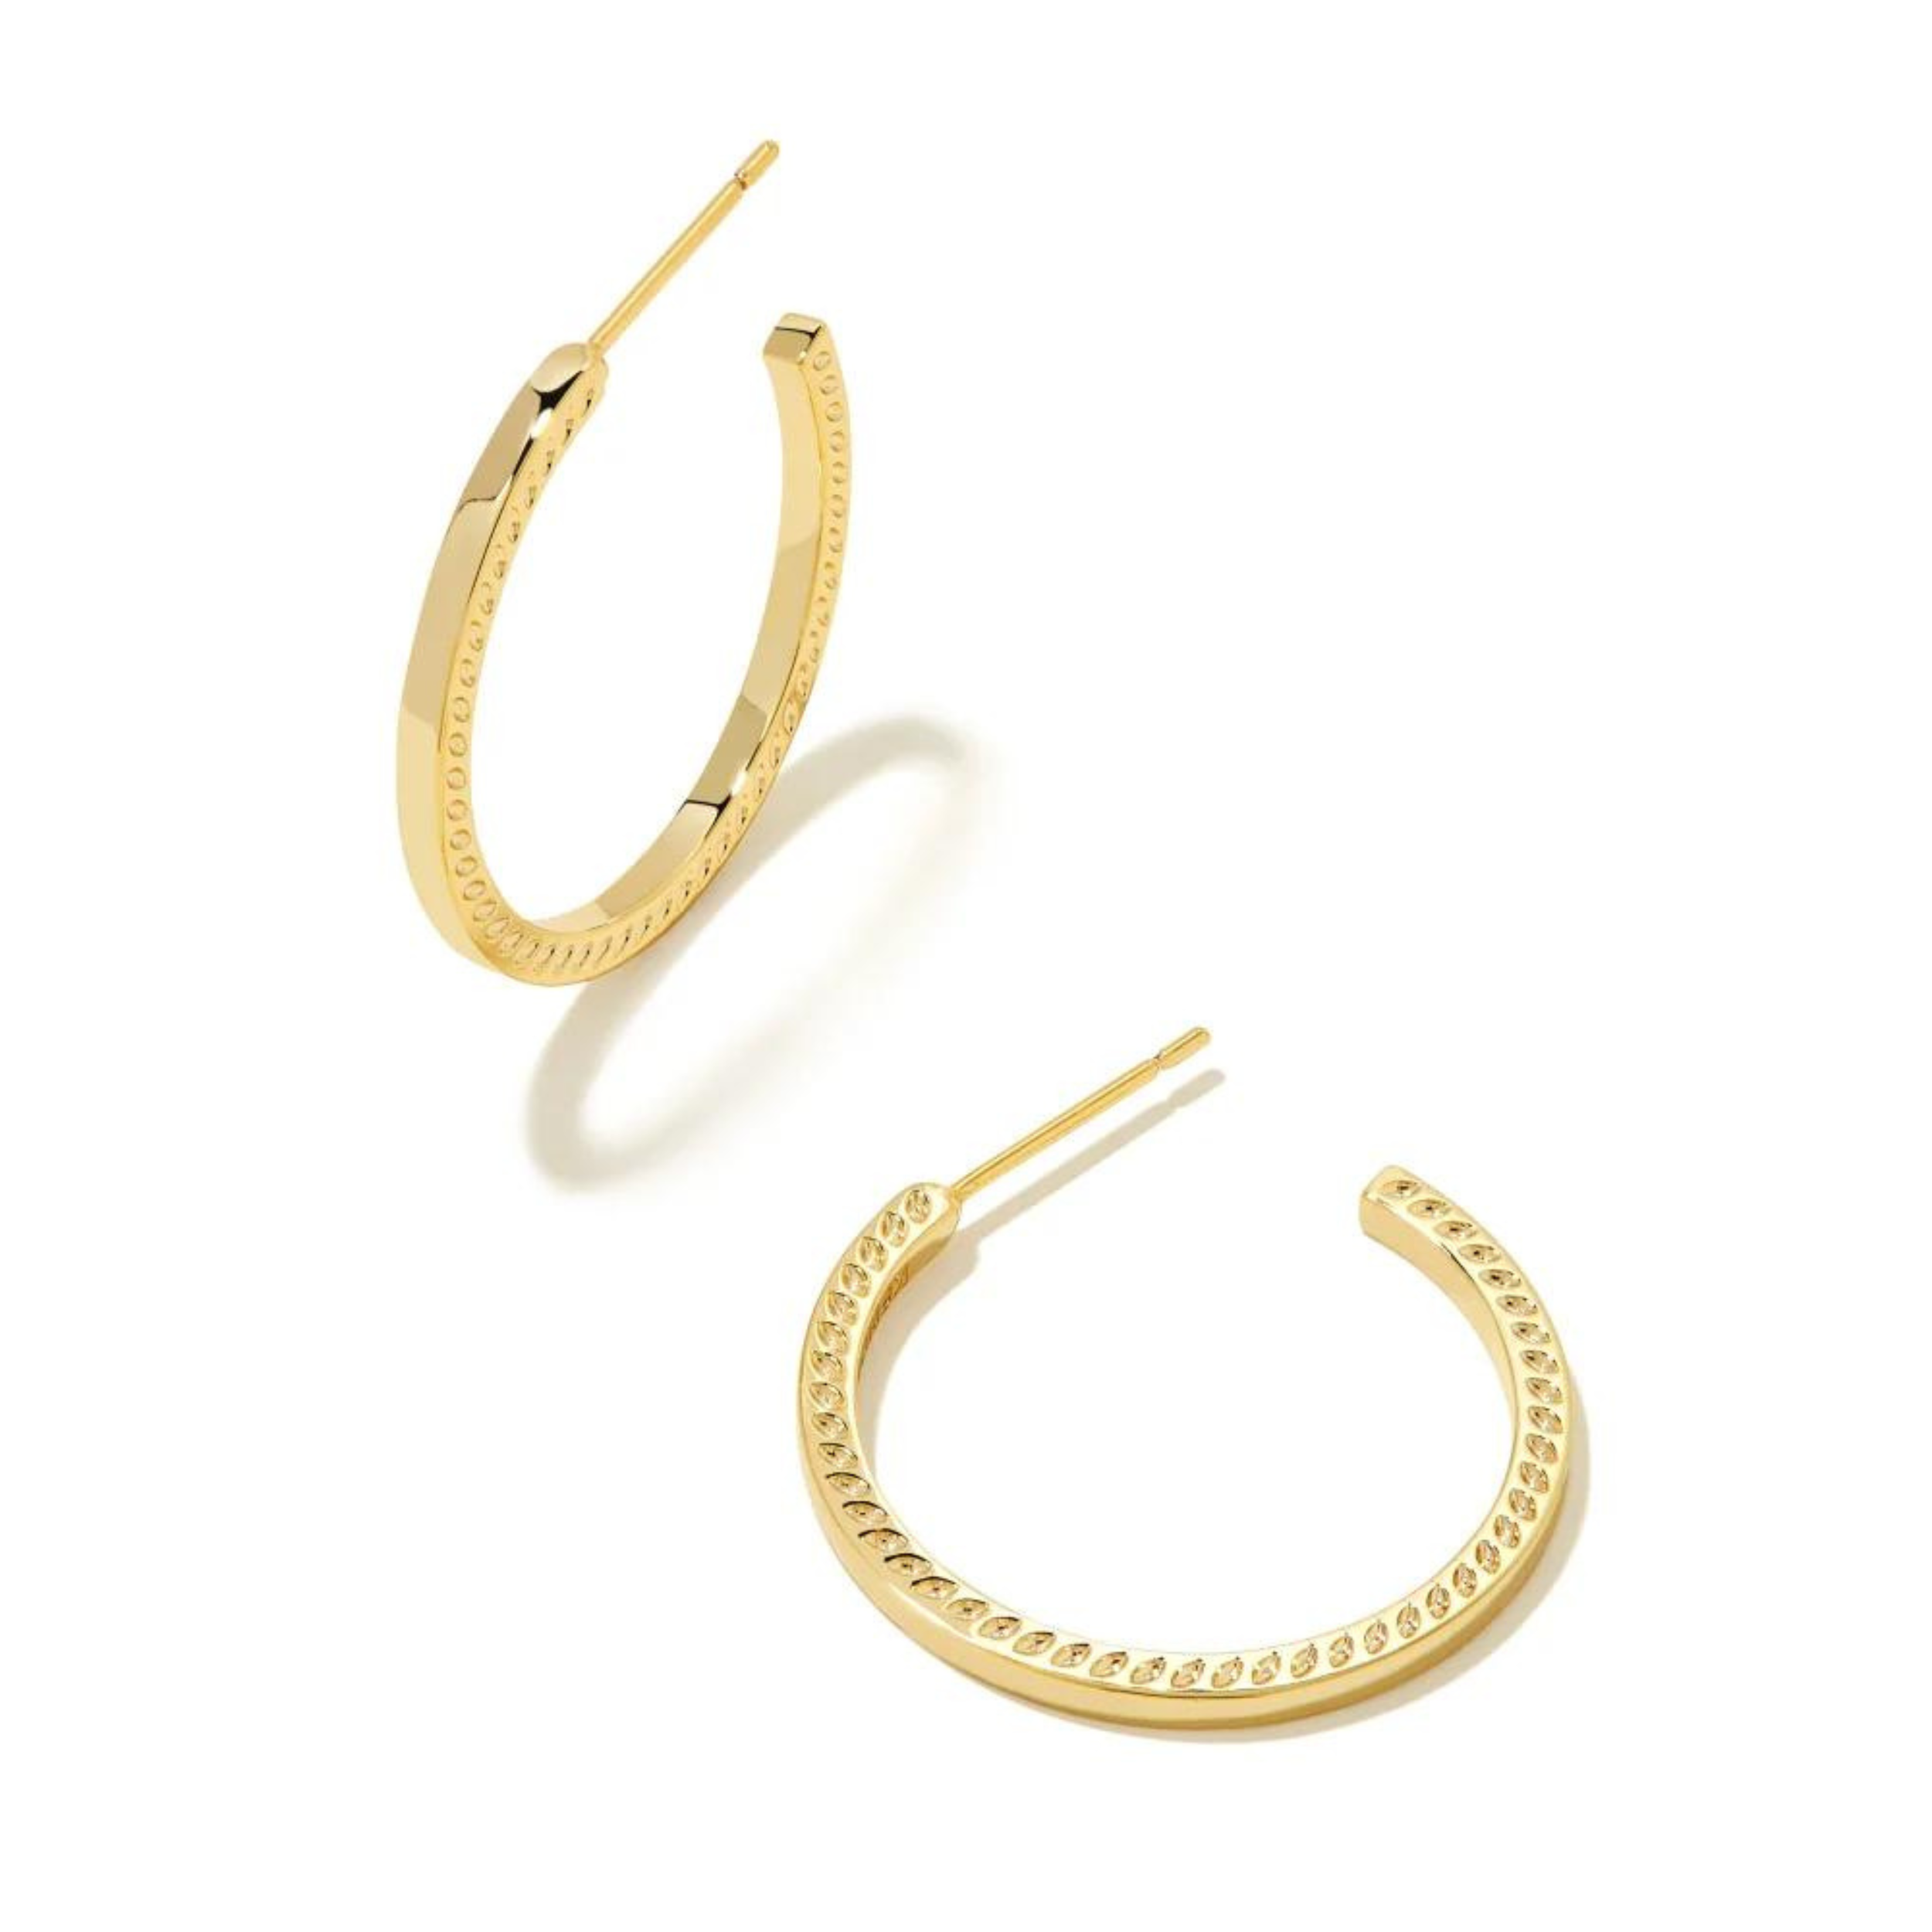 Pictured is a pair of gold hoop earrings on a white background.